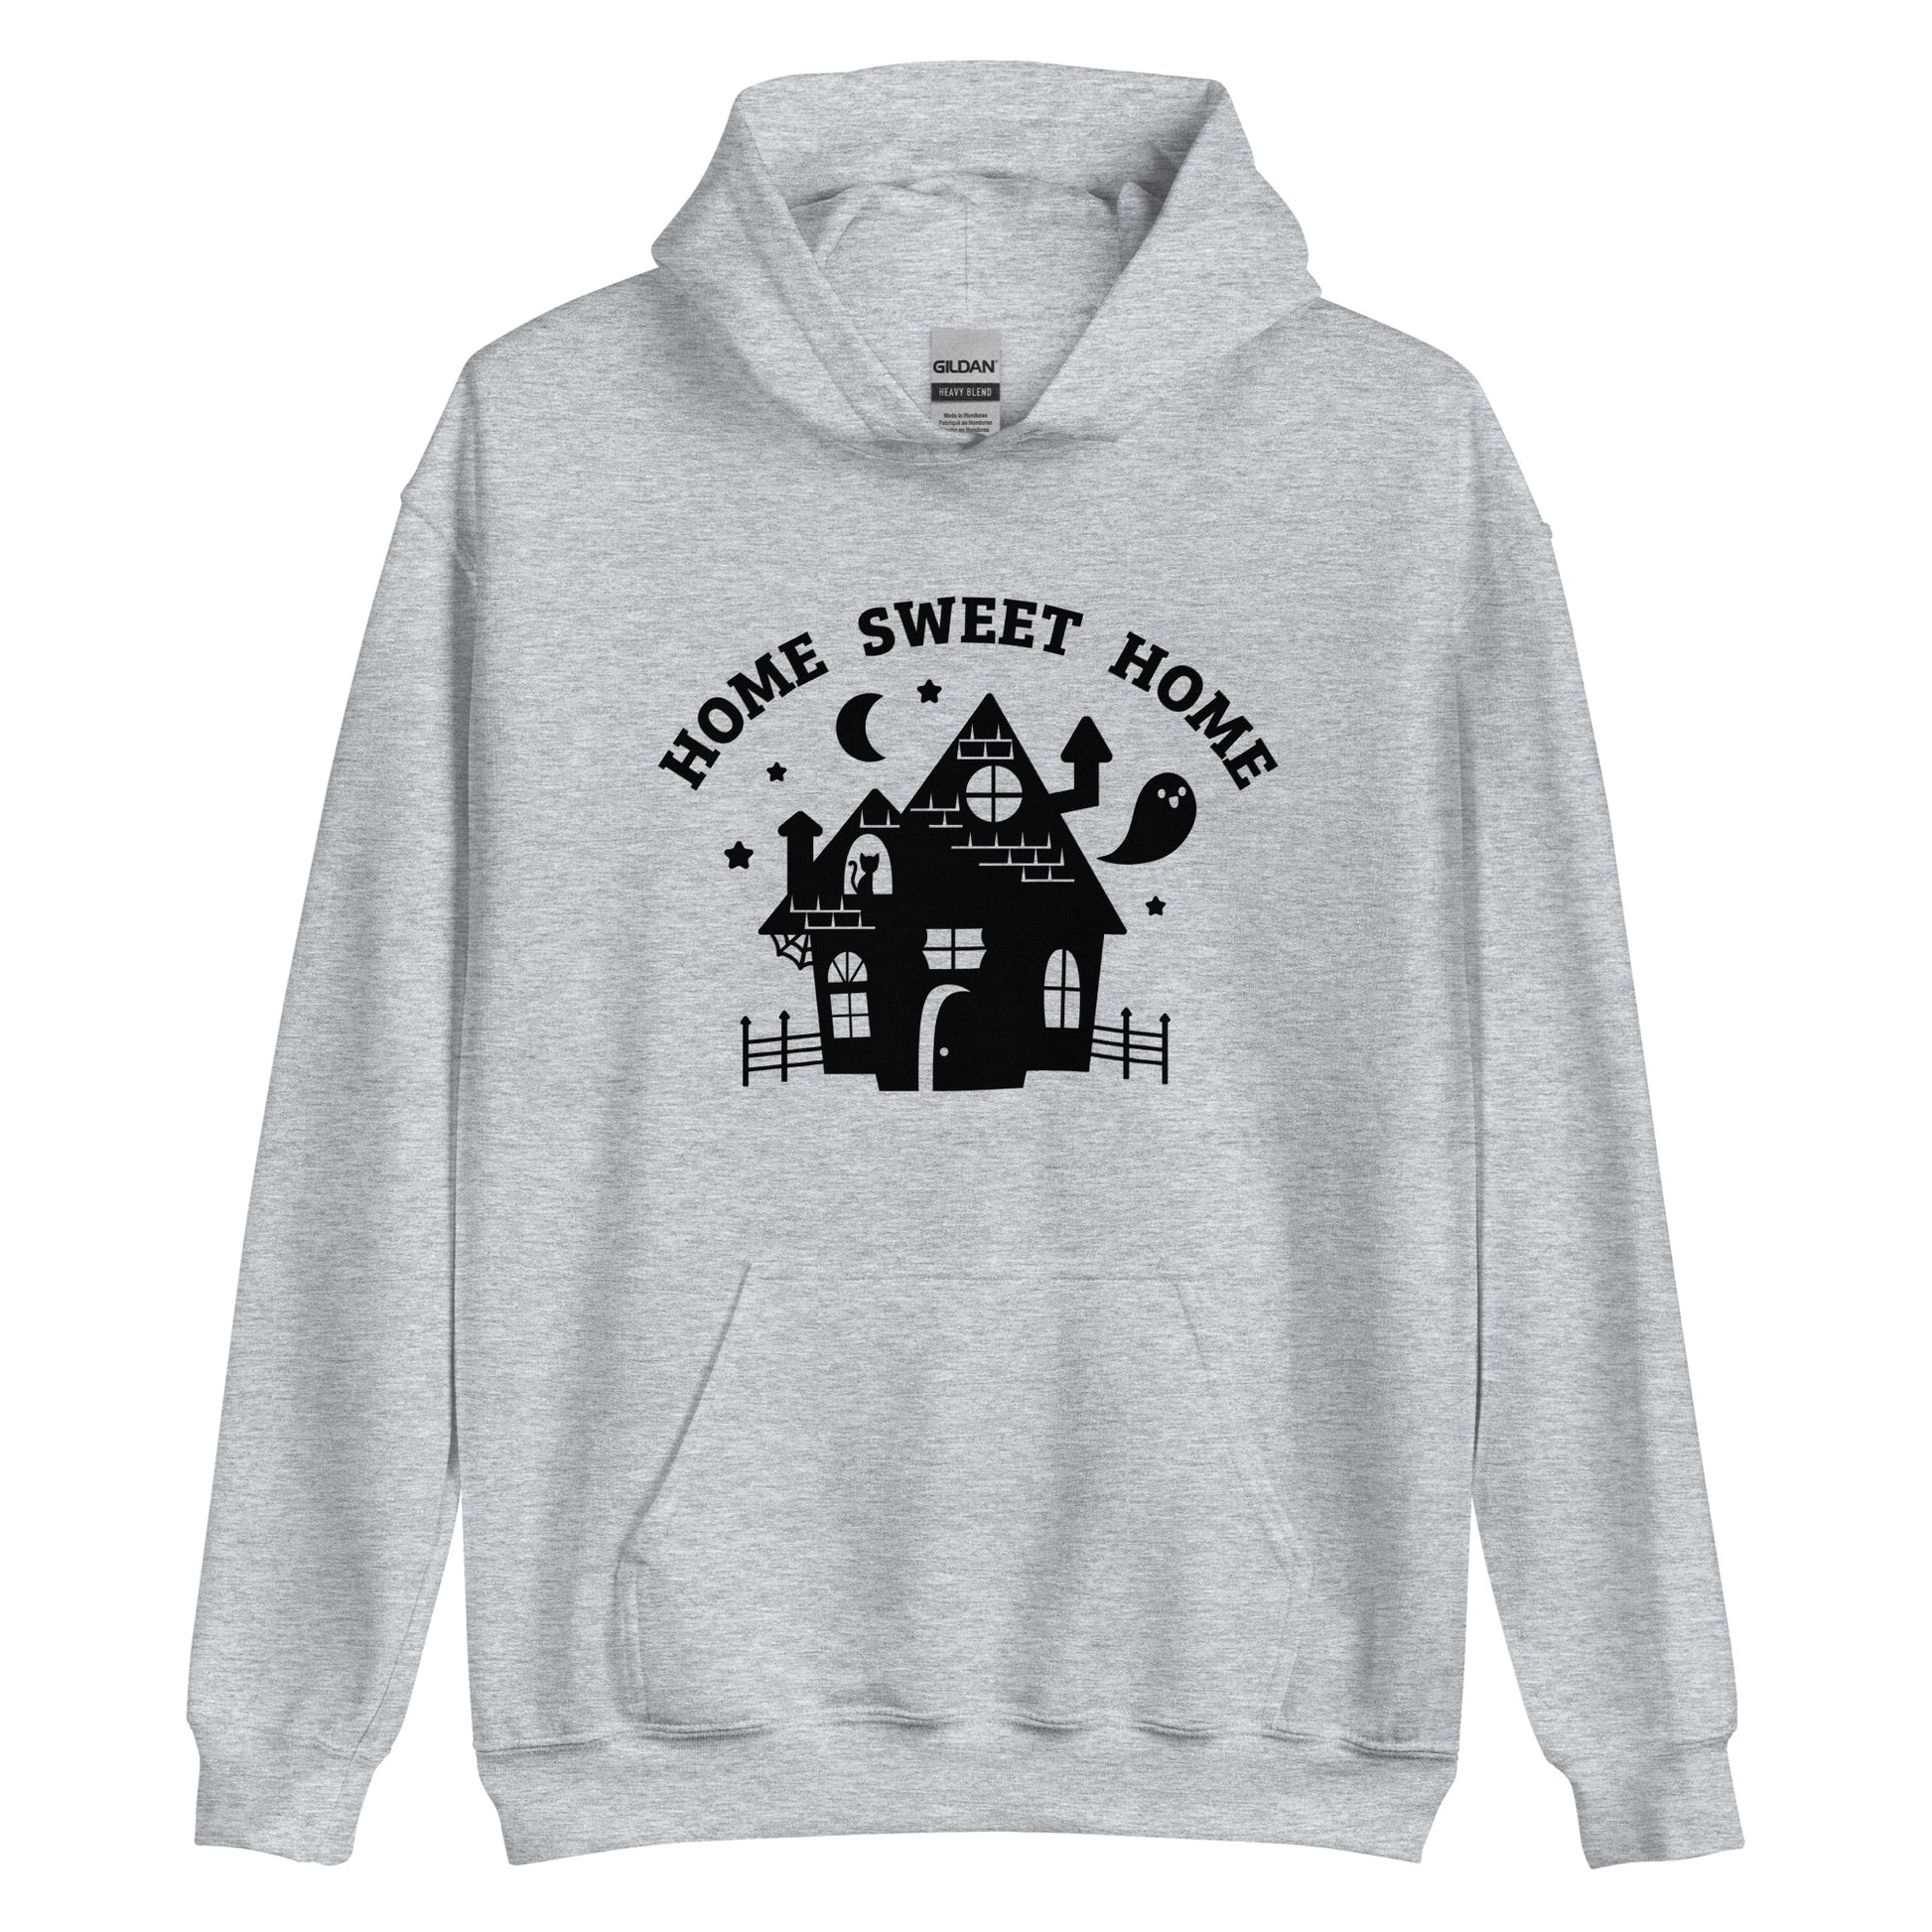 A grey hooded sweatshirt featuring a cutesy image of a haunted house. Text above the house reads "HOME SWEET HOME"